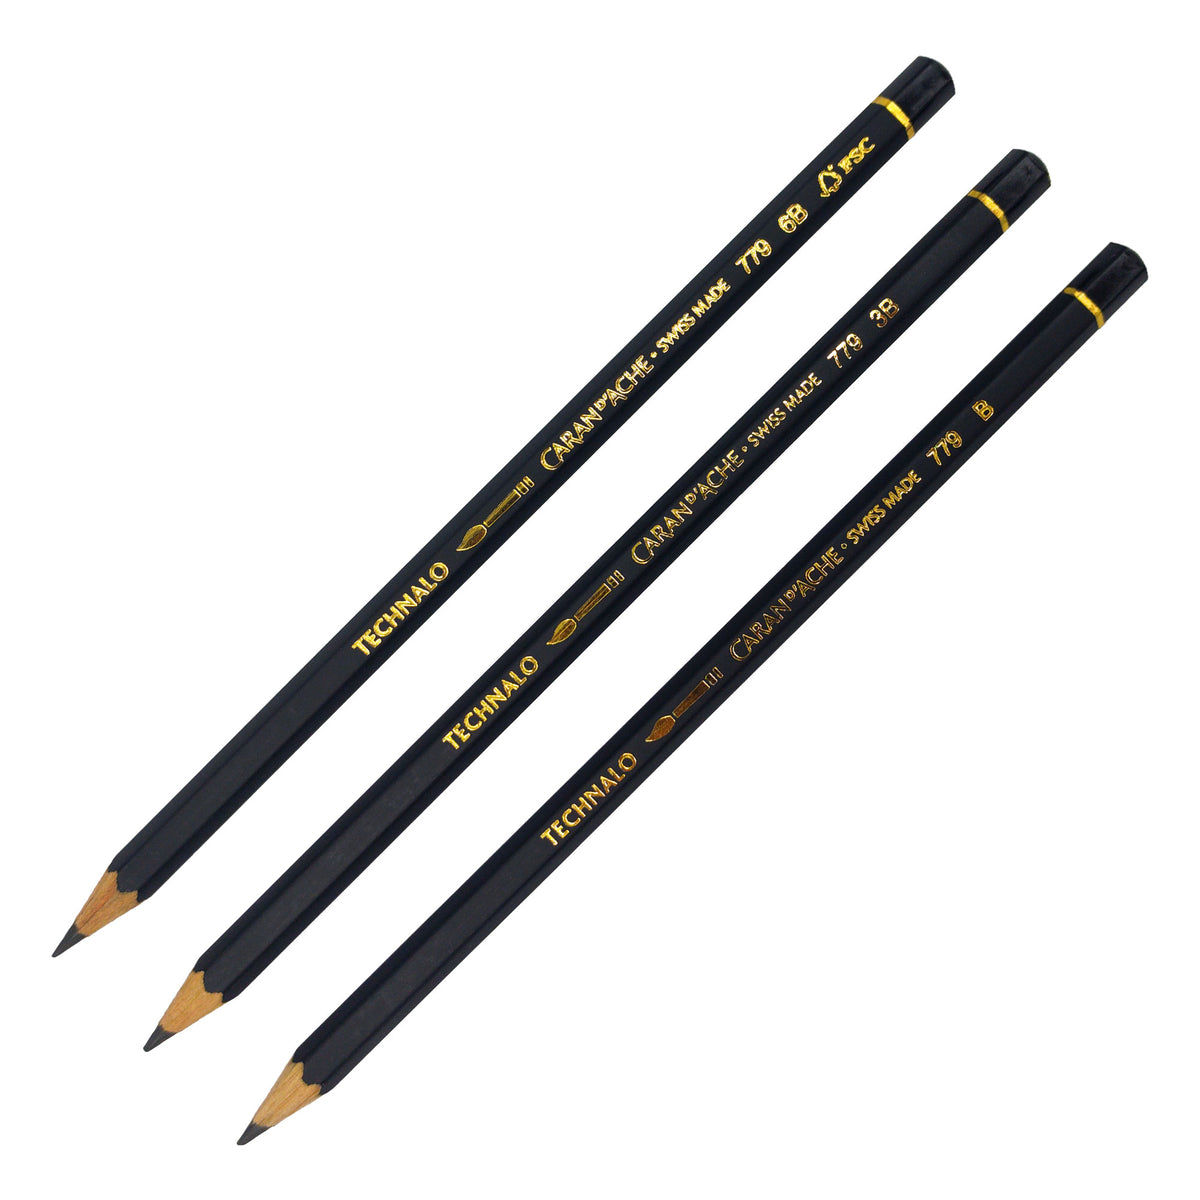 Caran d&#39;Ache Technalo Water Soluble Graphite Pencils in 6B, 3B, and B.